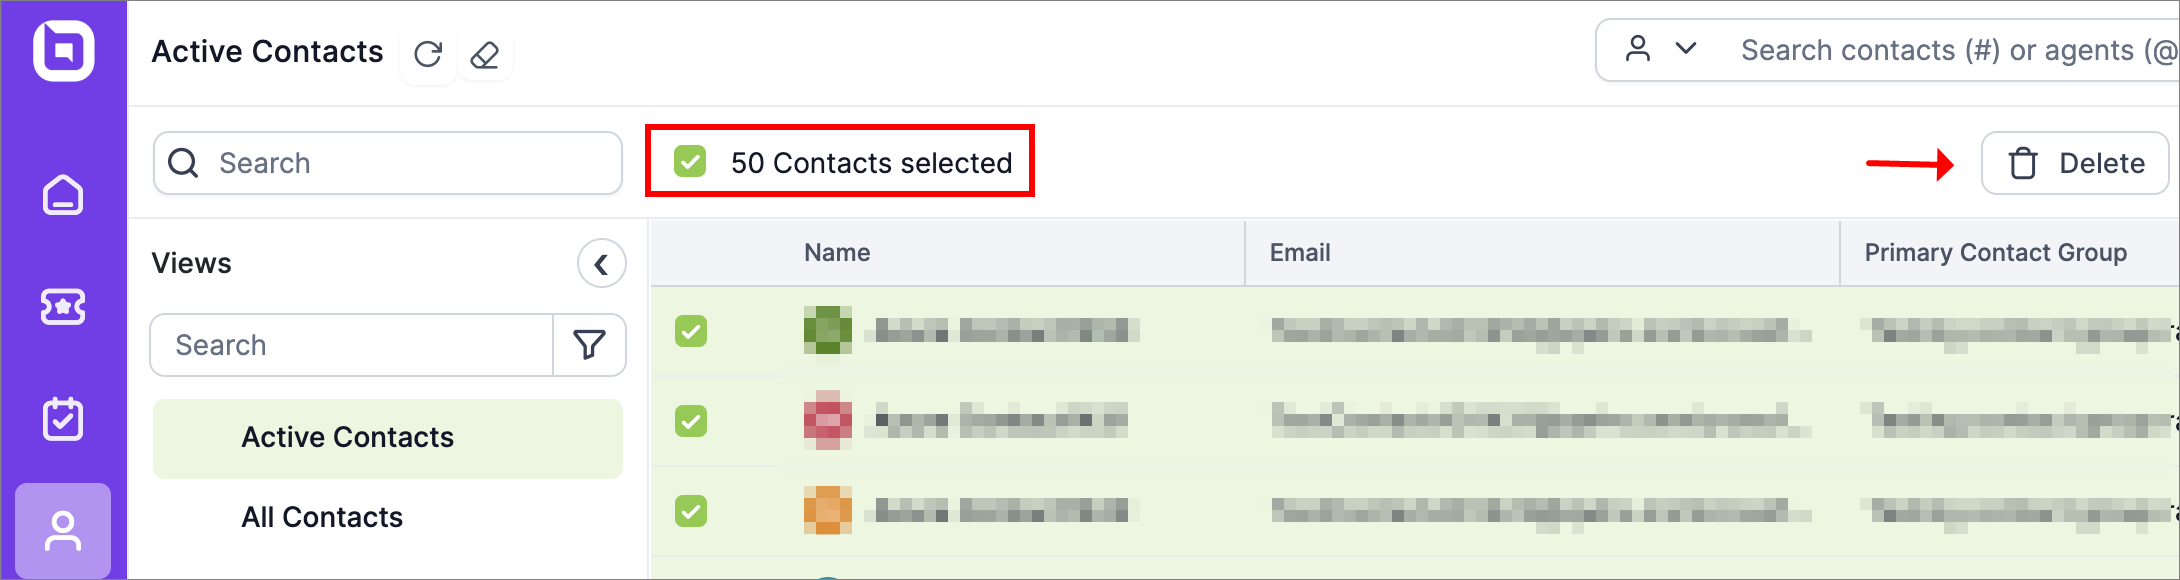 Select_all_contacts.png